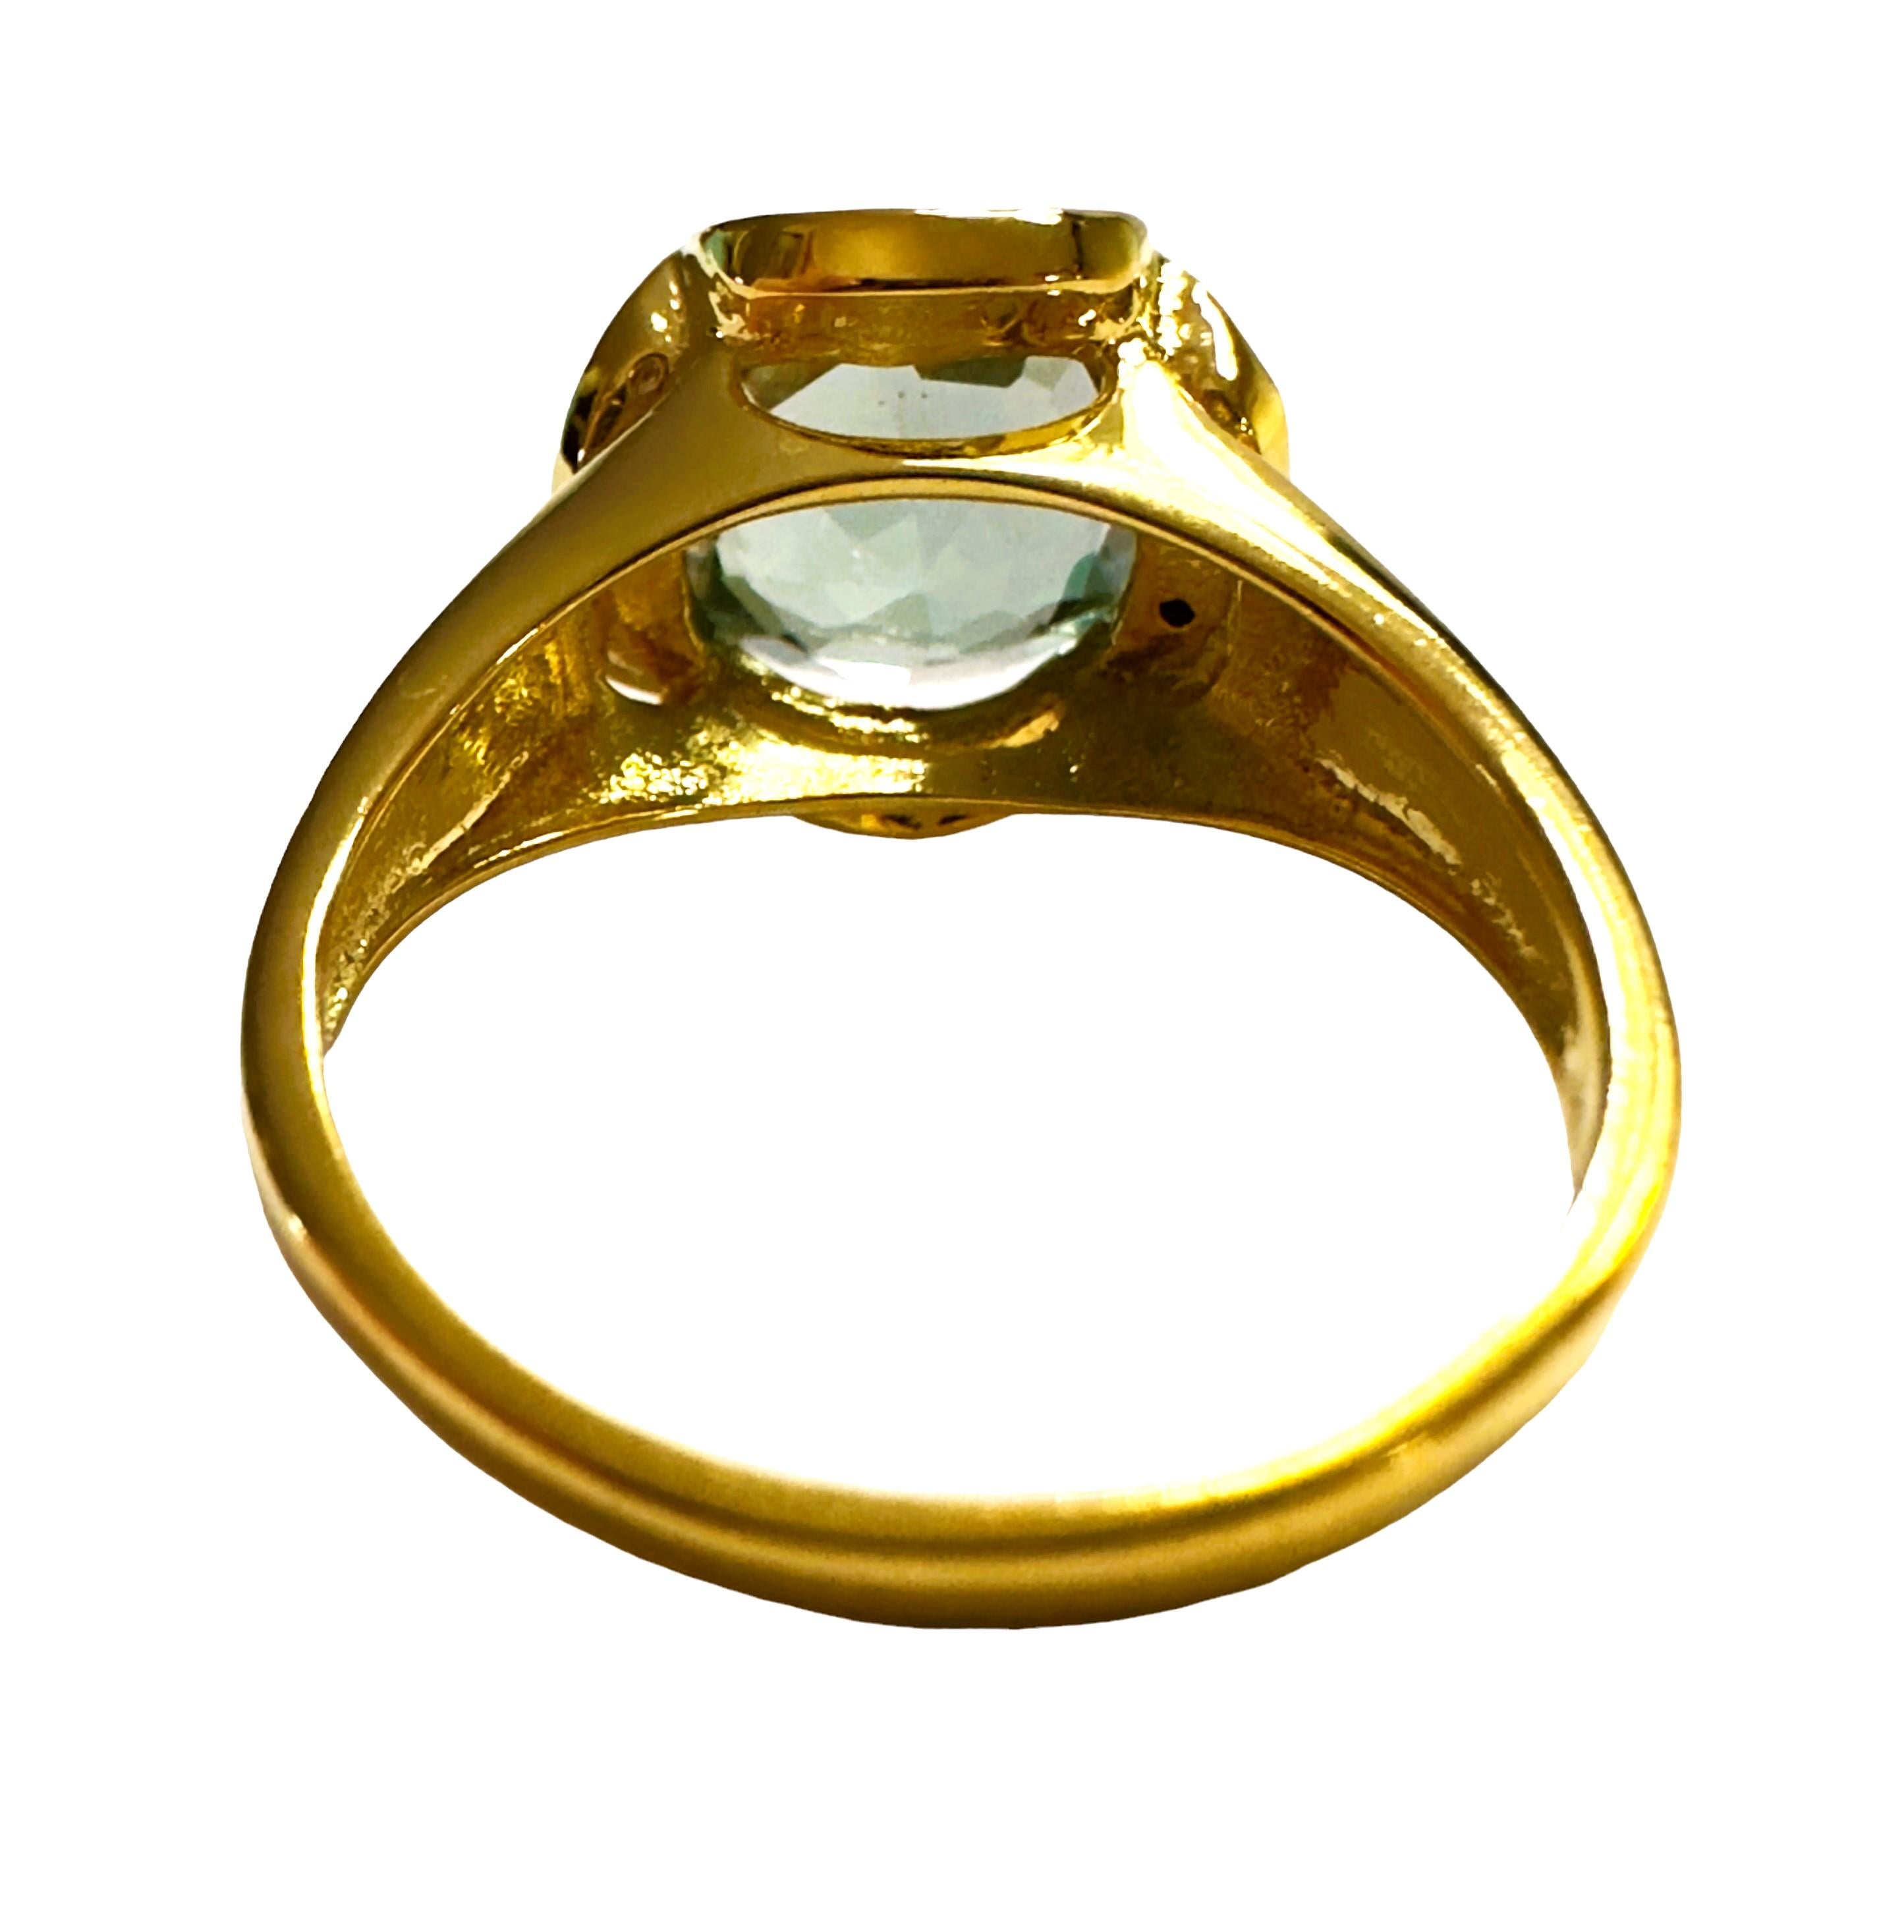 What a beautiful ring this is!.  It is a size 7.25.  It was mined in Africa.  It is a very high quality stone.  The stone is a round cut stone and is 4.10 cts.  It's just a great simple and elegant design.  The main stone measures 10.2 mm and is